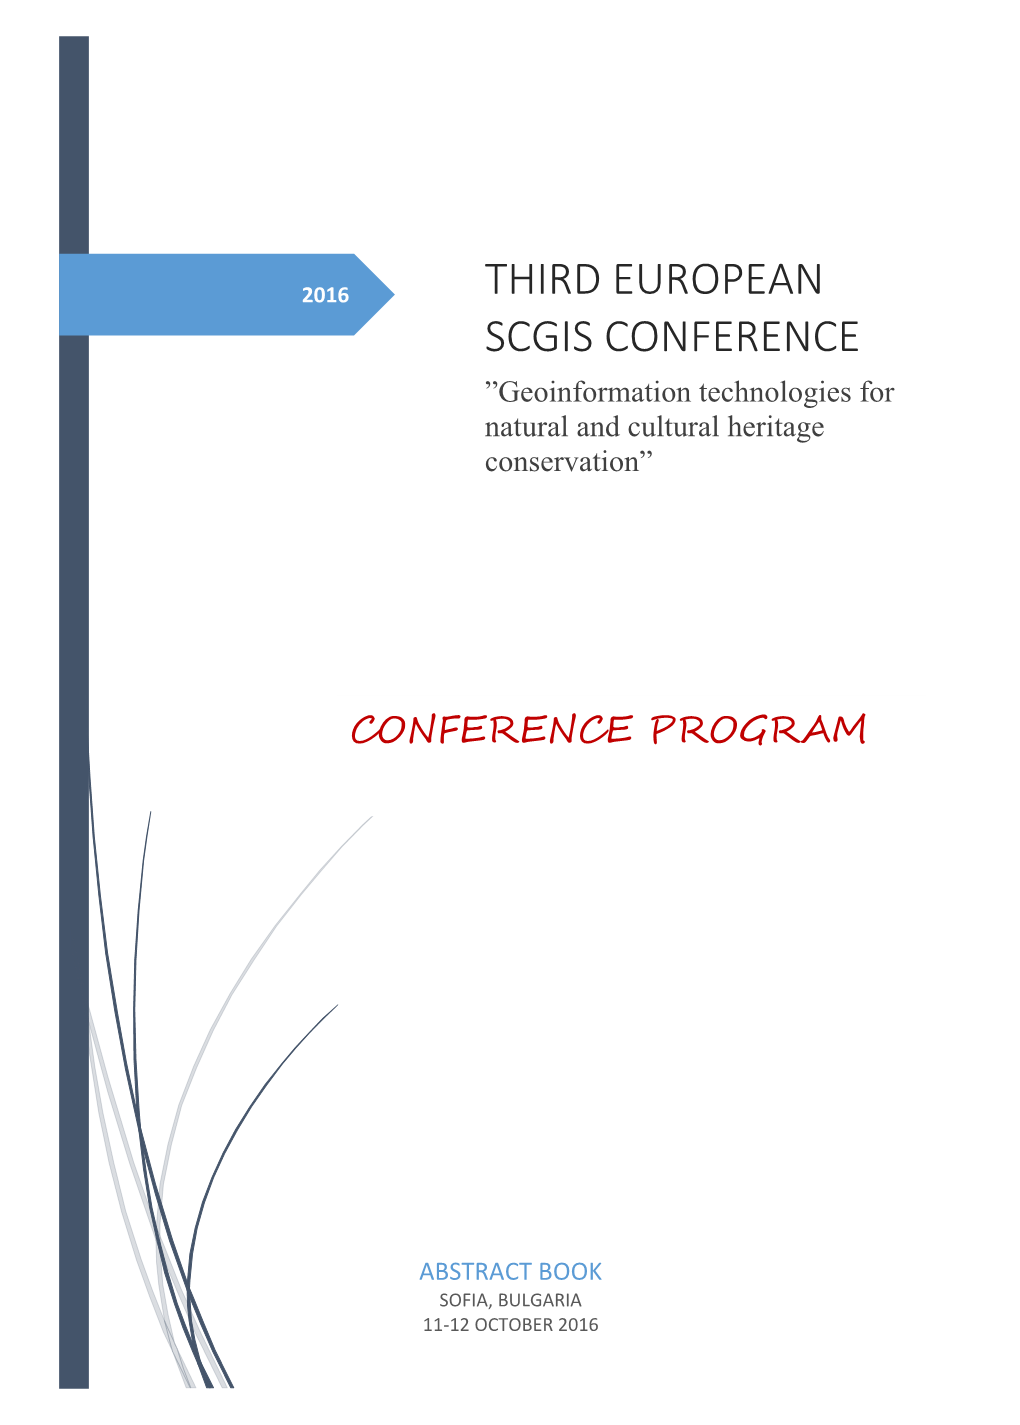 THIRD EUROPEAN SCGIS CONFERENCE ”Geoinformation Technologies for Natural and Cultural Heritage Conservation”